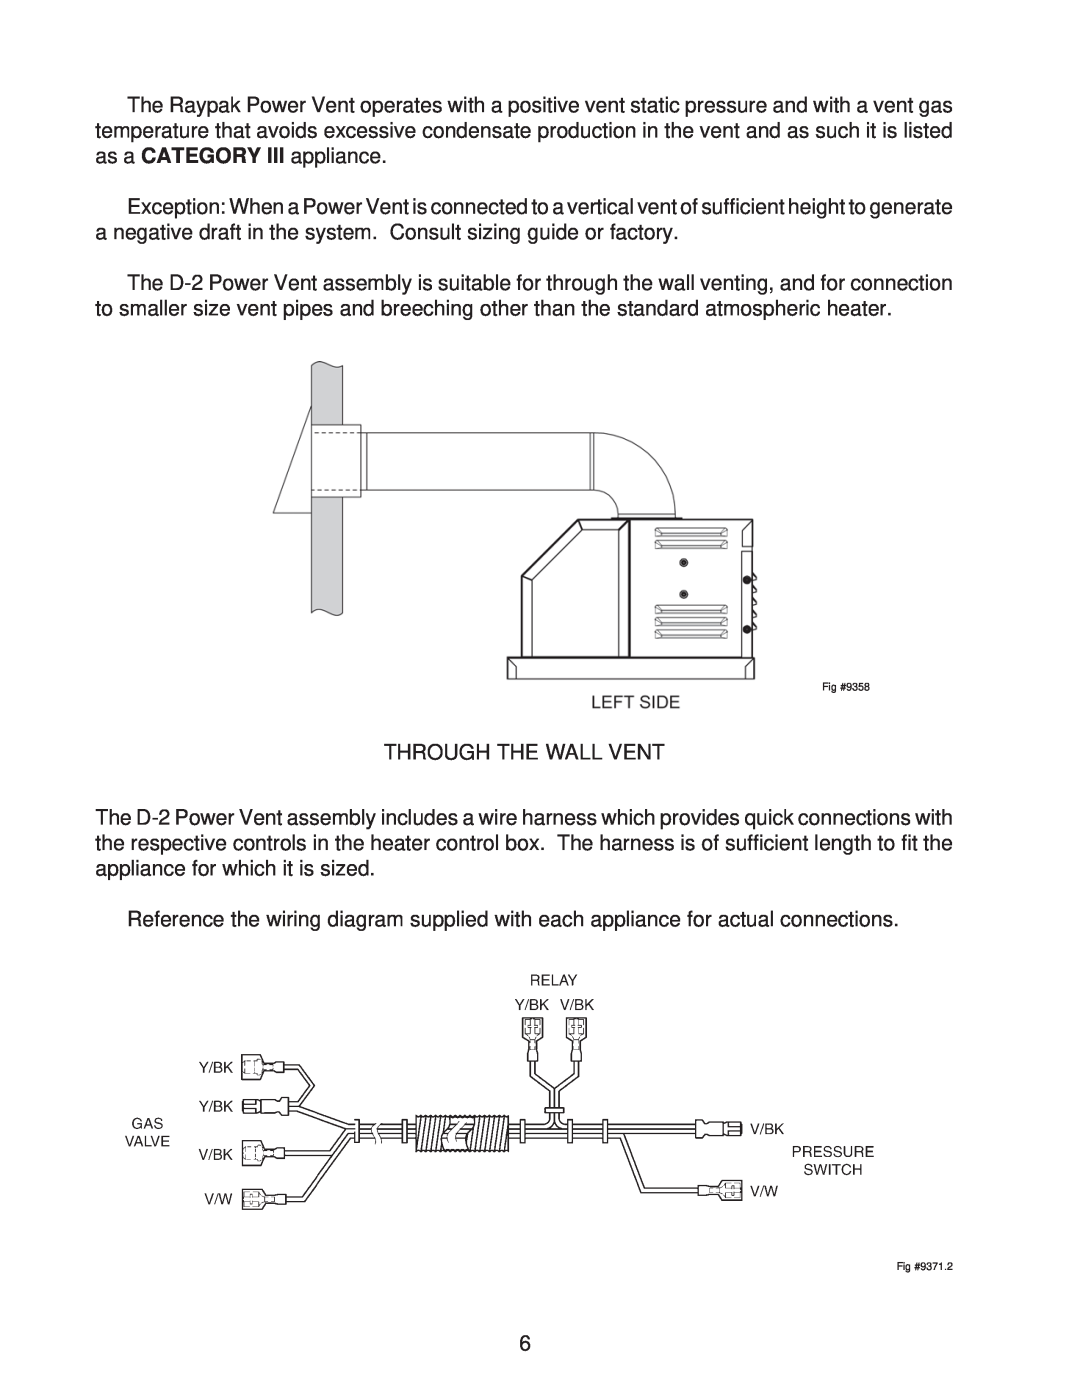 Raypak 405, 185, 335, 265 installation instructions Through The Wall Vent 